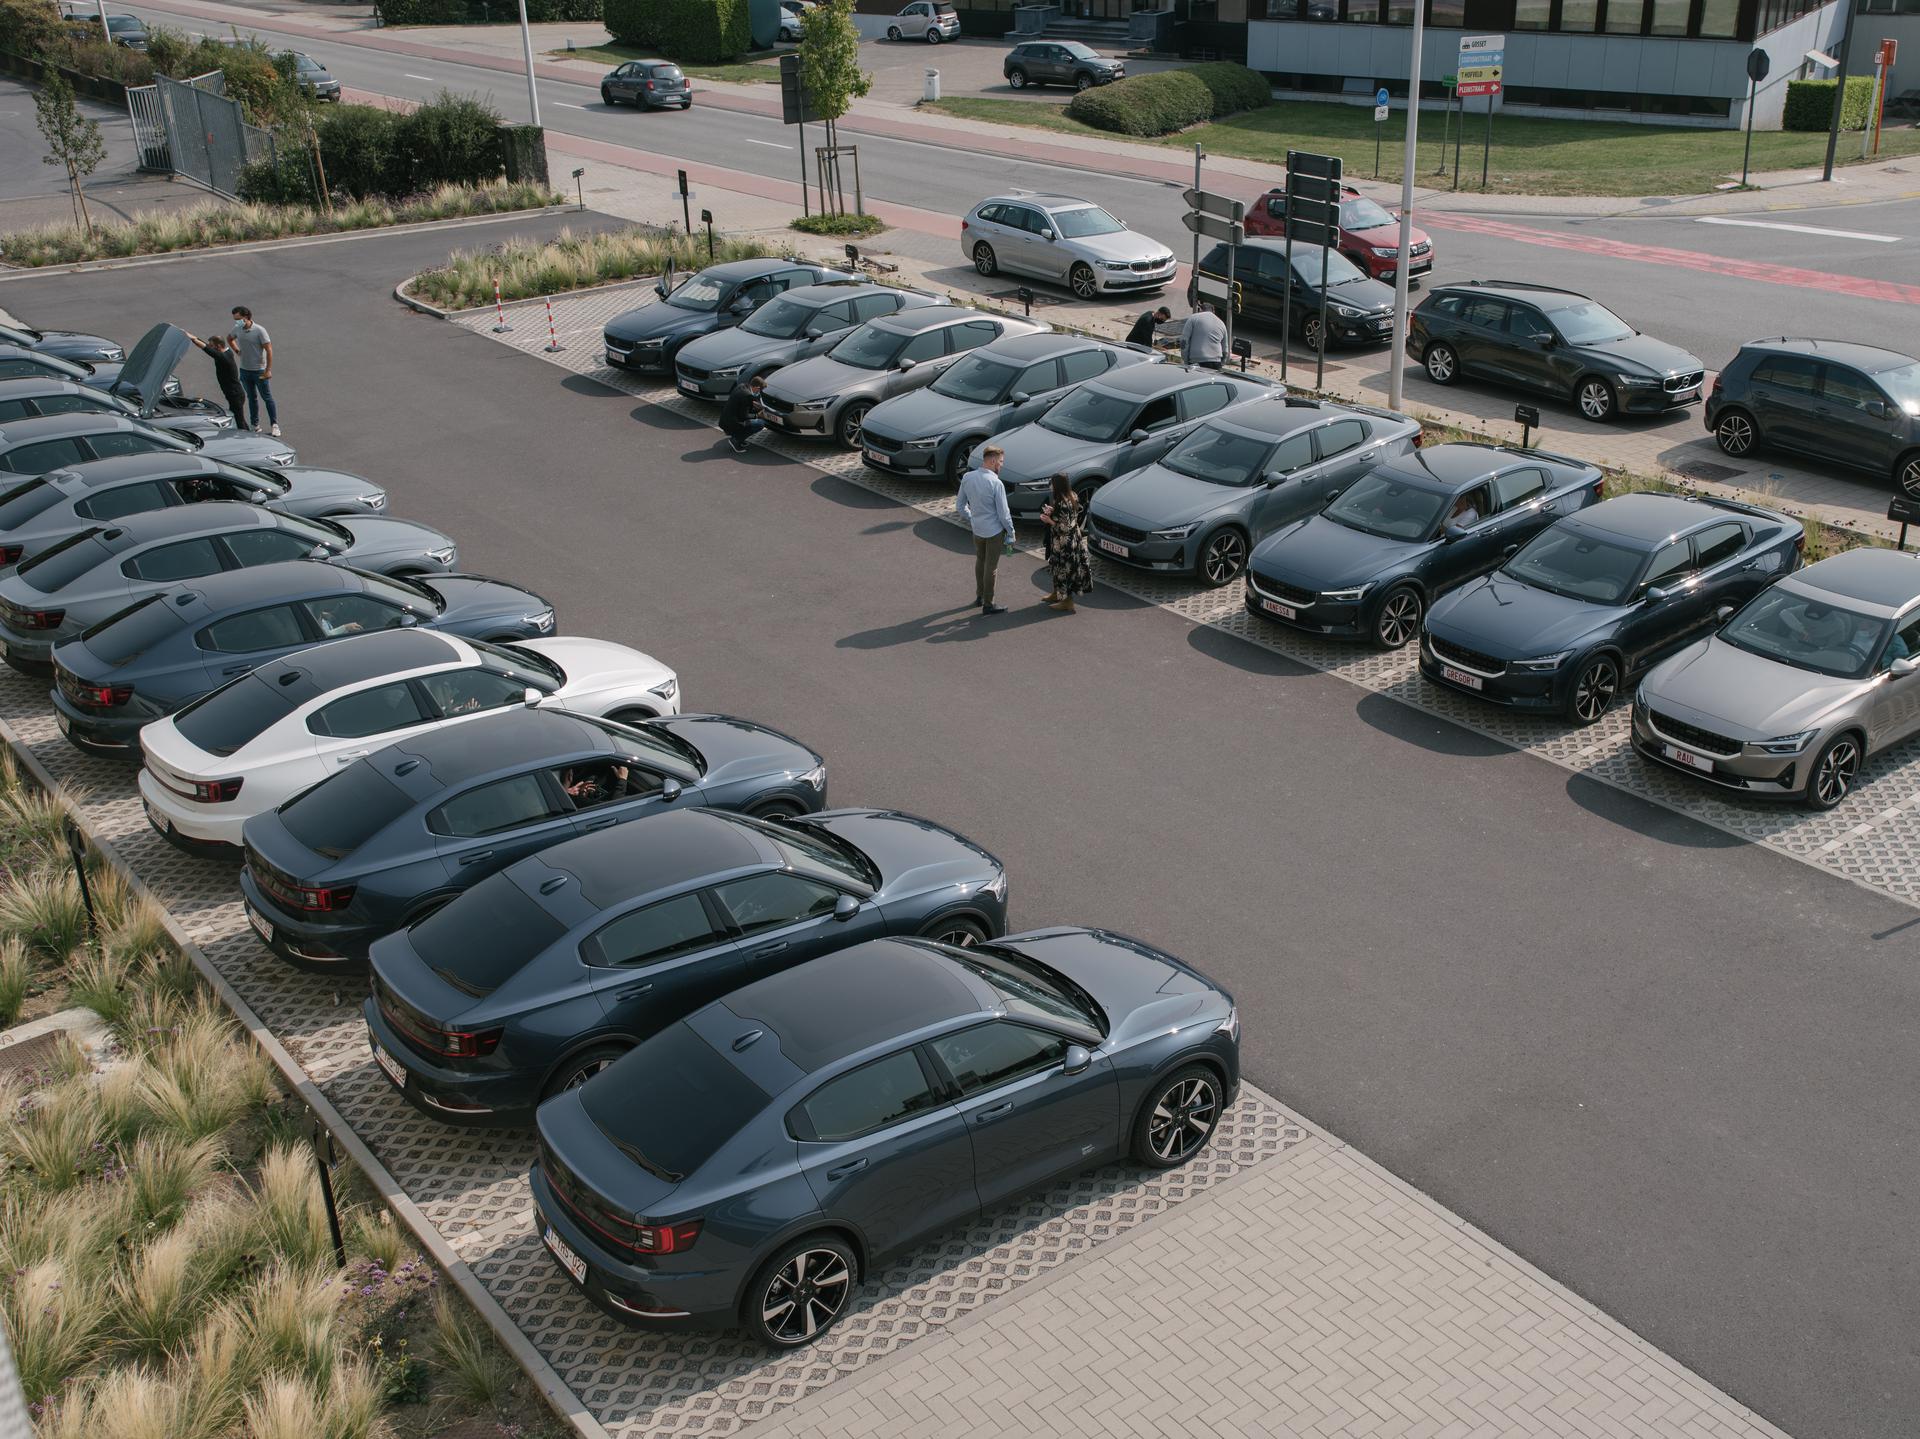 LeasePlan Belgium delivers the first thirty Polestar 2s